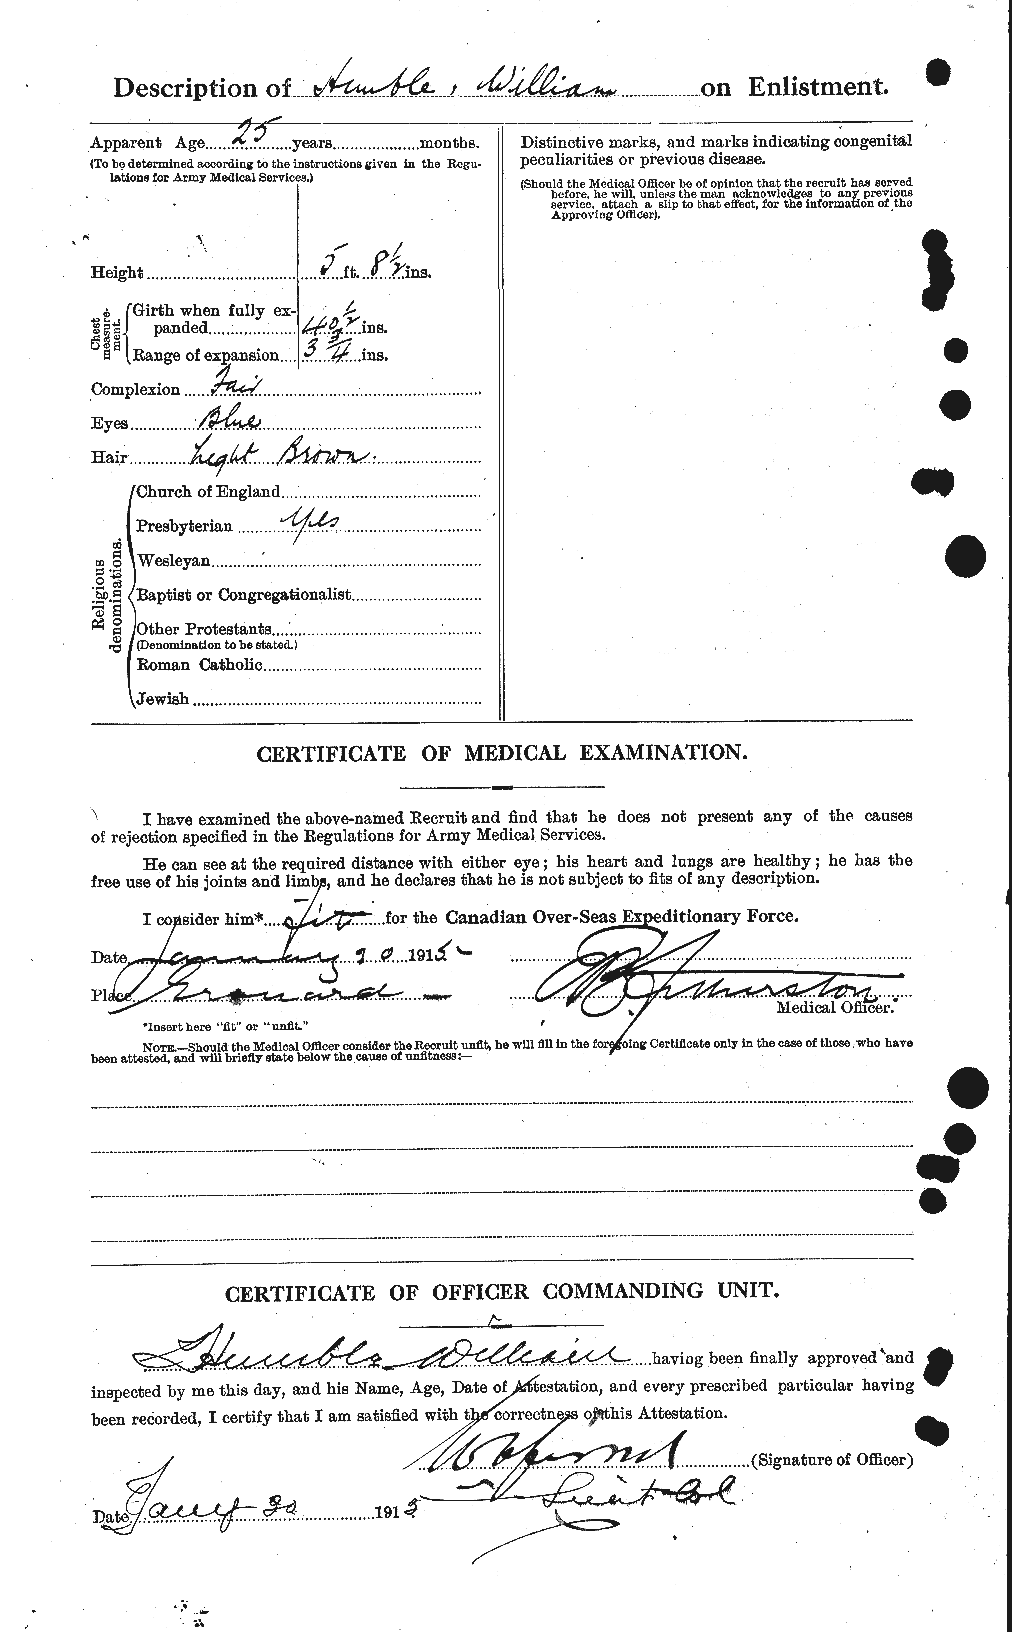 Personnel Records of the First World War - CEF 407202b